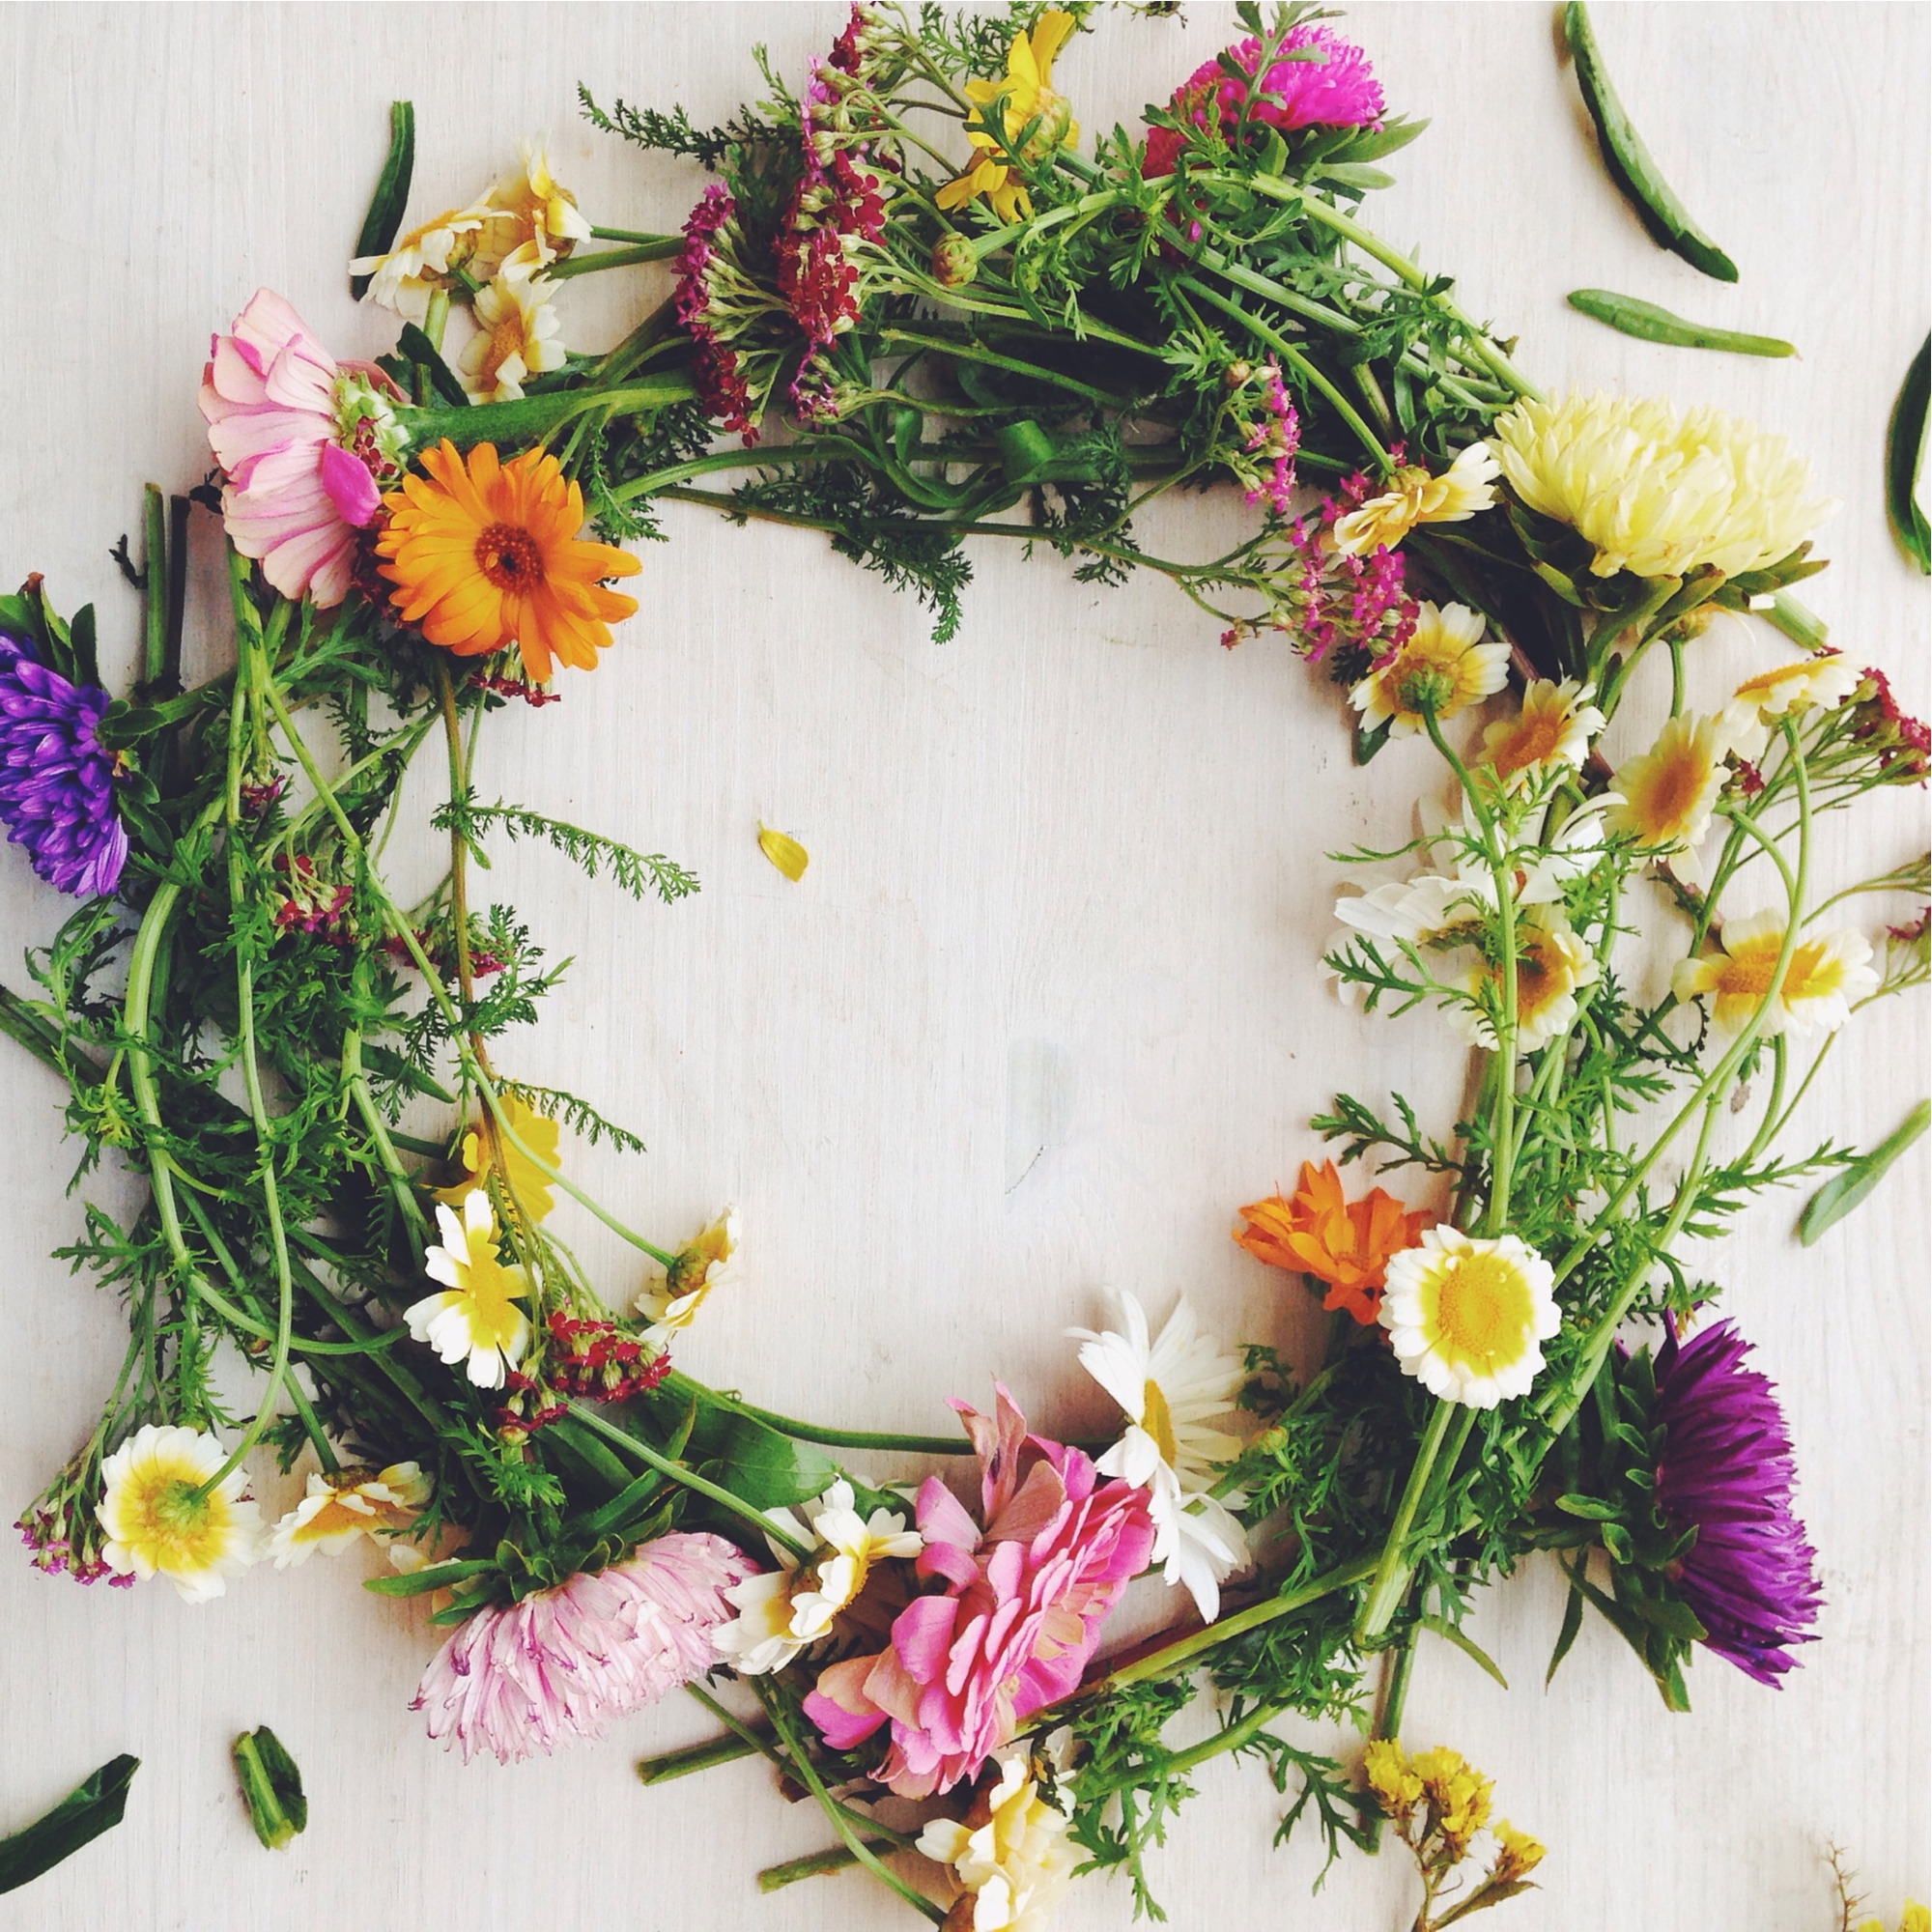 wreath | spring wreath | spring | diy spring wreath | diy wreath | diy | spring projects | spring crafts | crafts | projects 